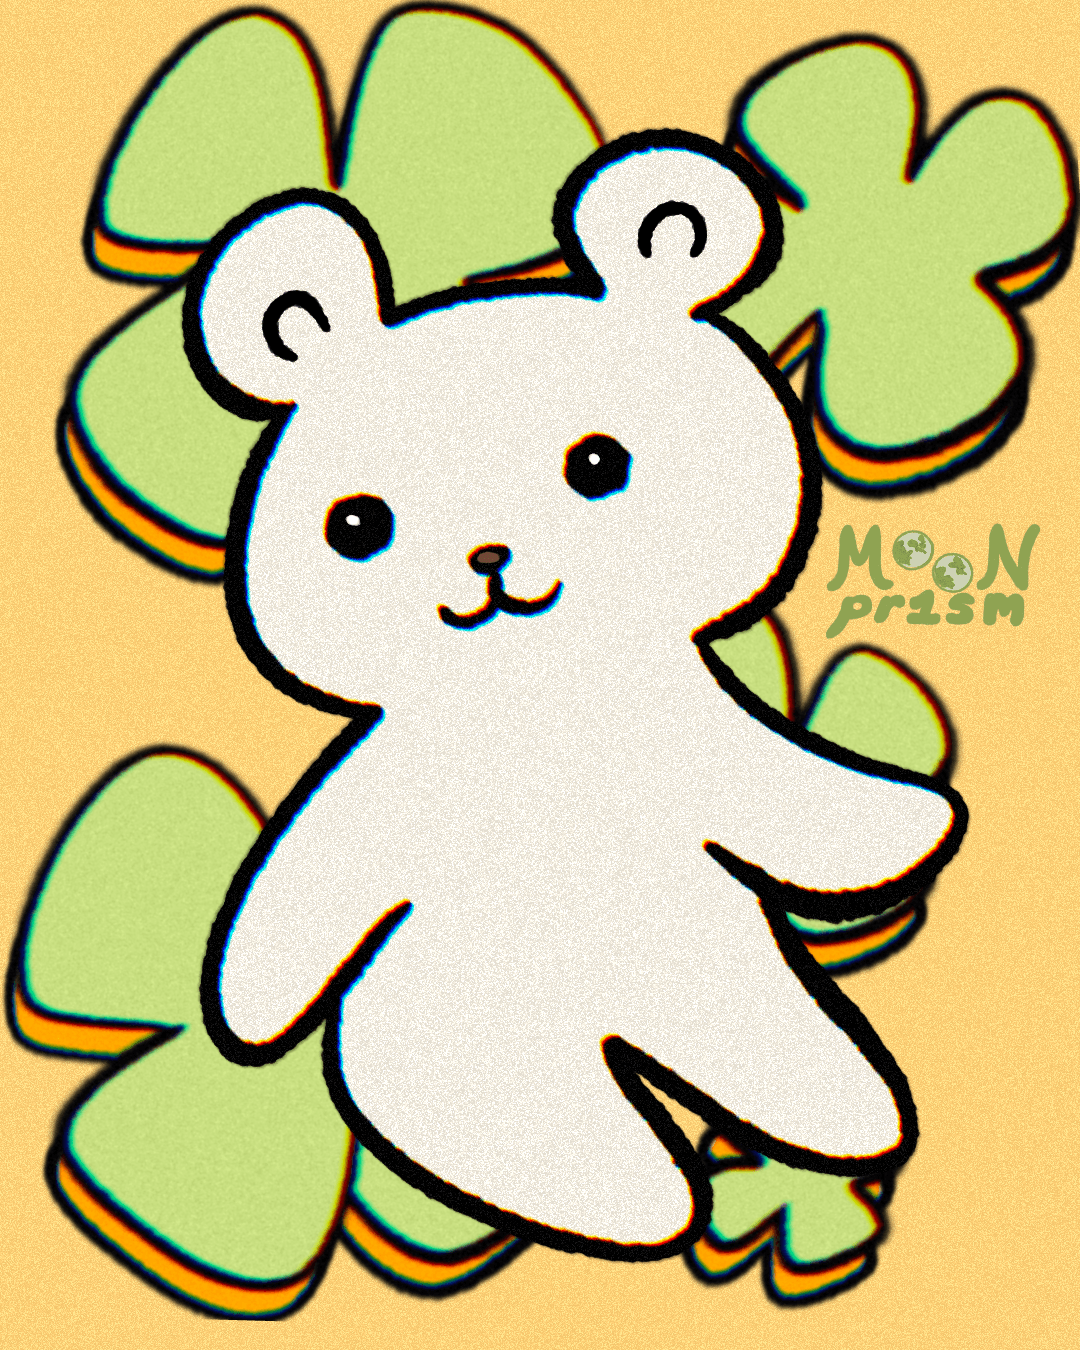 An illustration of 'Binky', a little white polar bear character, sitting happily on some light green clovers on a pastel yellow background.